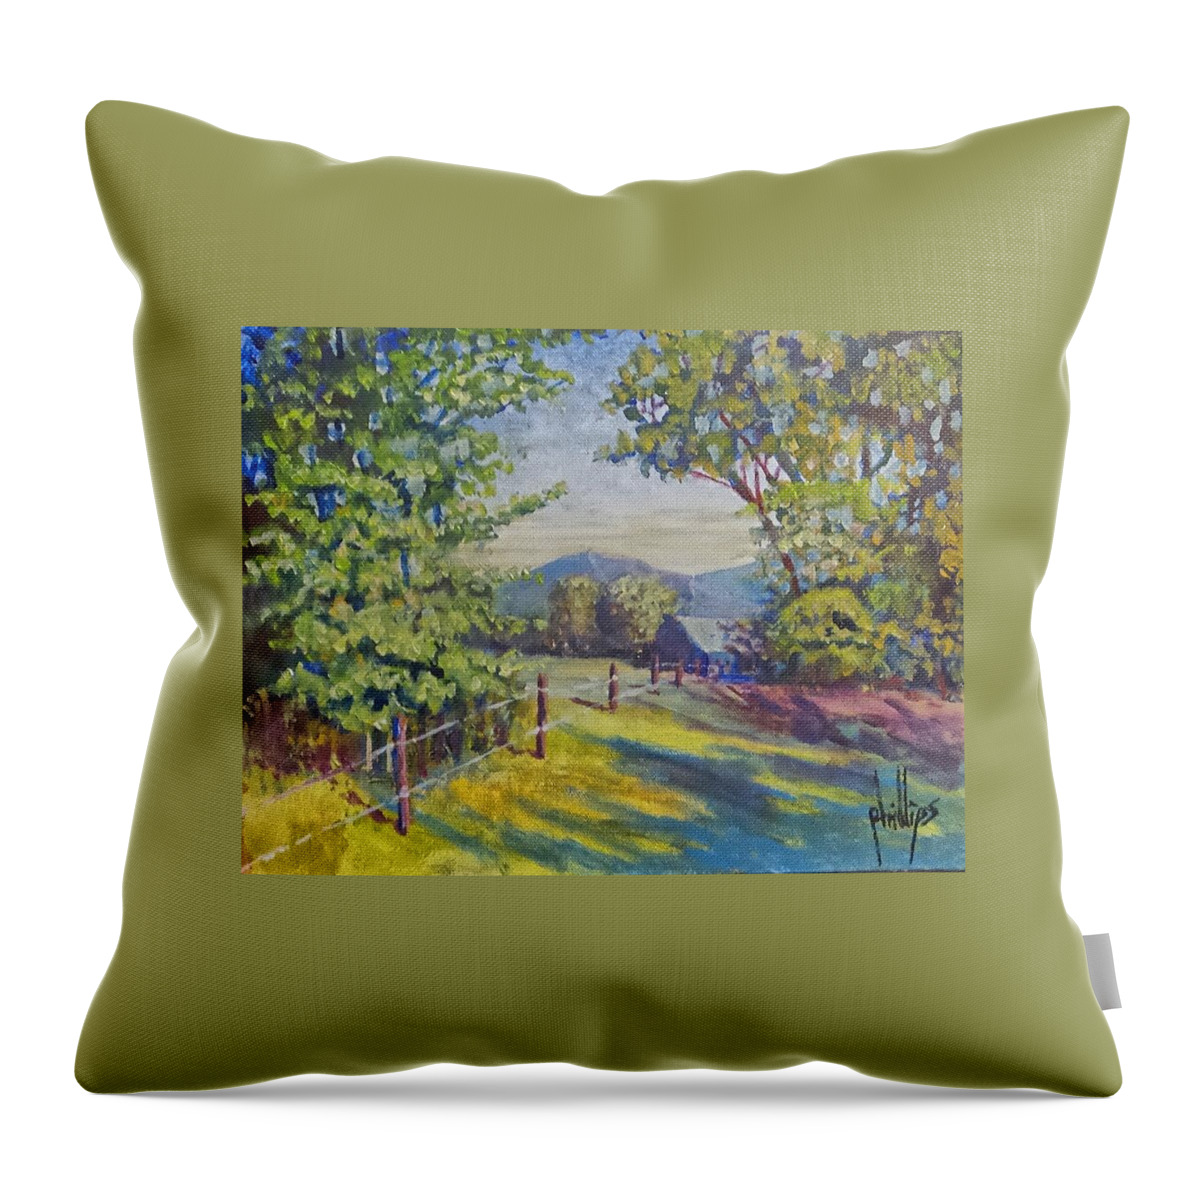  Throw Pillow featuring the painting Late Afternoon Shadows by James H Phillips